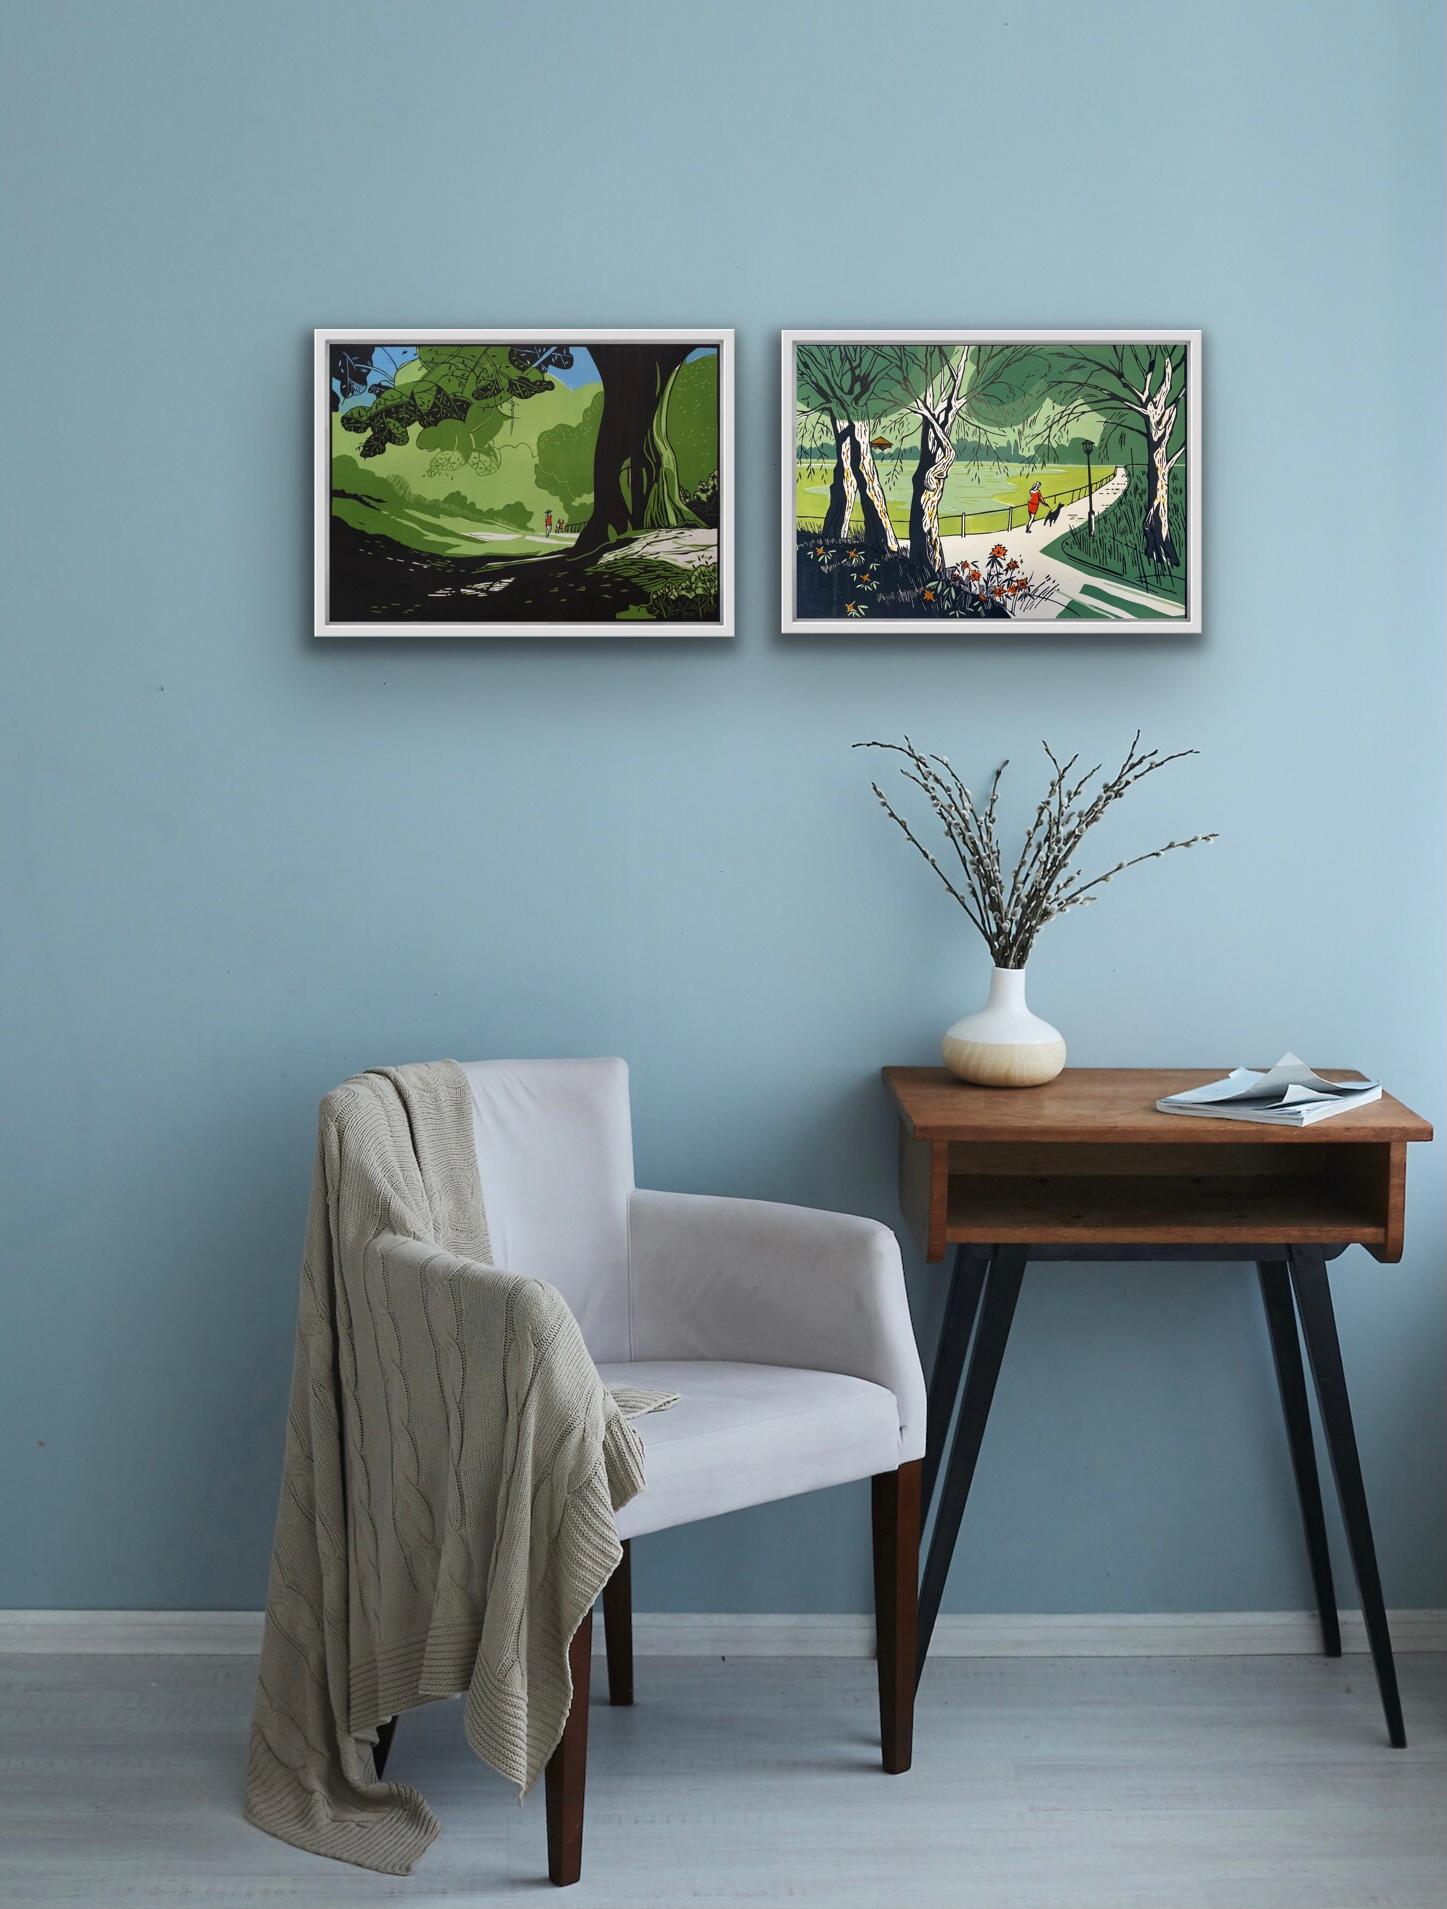 Hampstead Heath Summer and Hampstead Pond Diptych, Cityscape prints of London 1